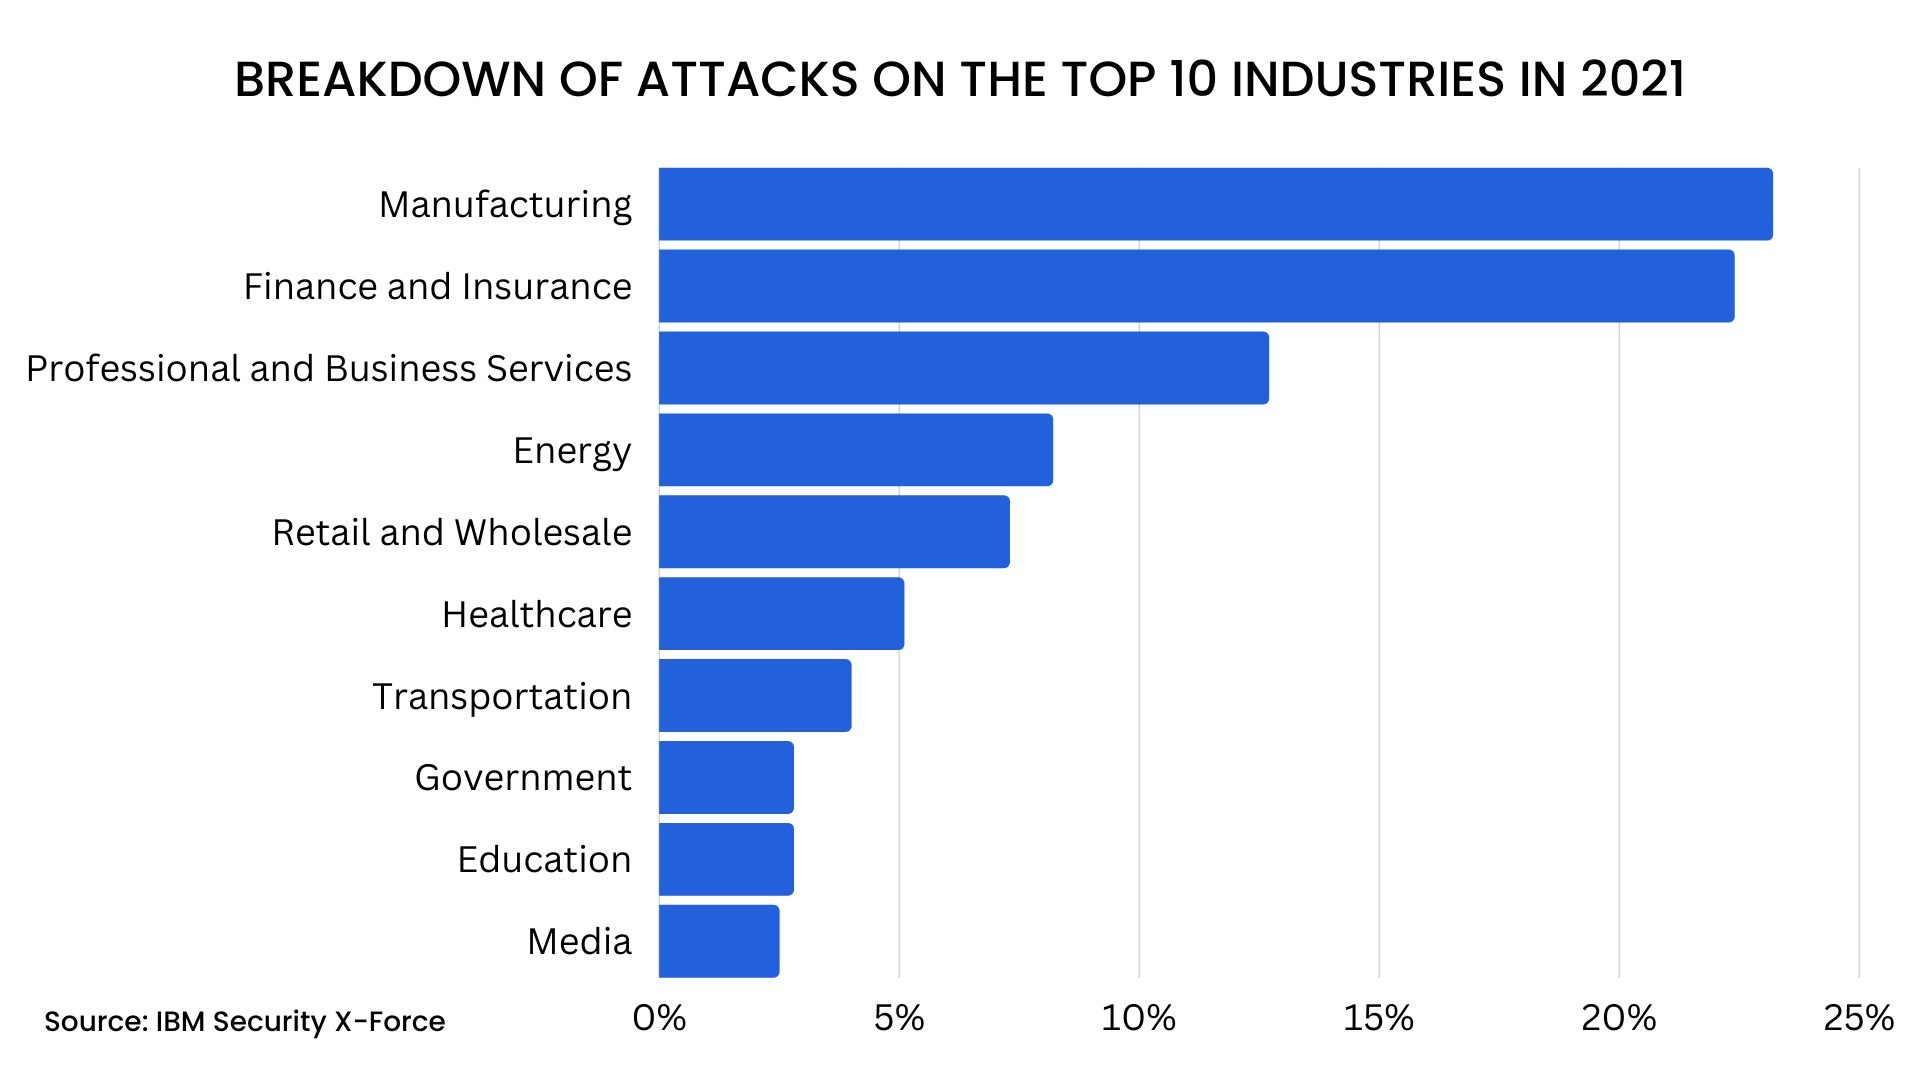 Most Attacked Industries in 2021